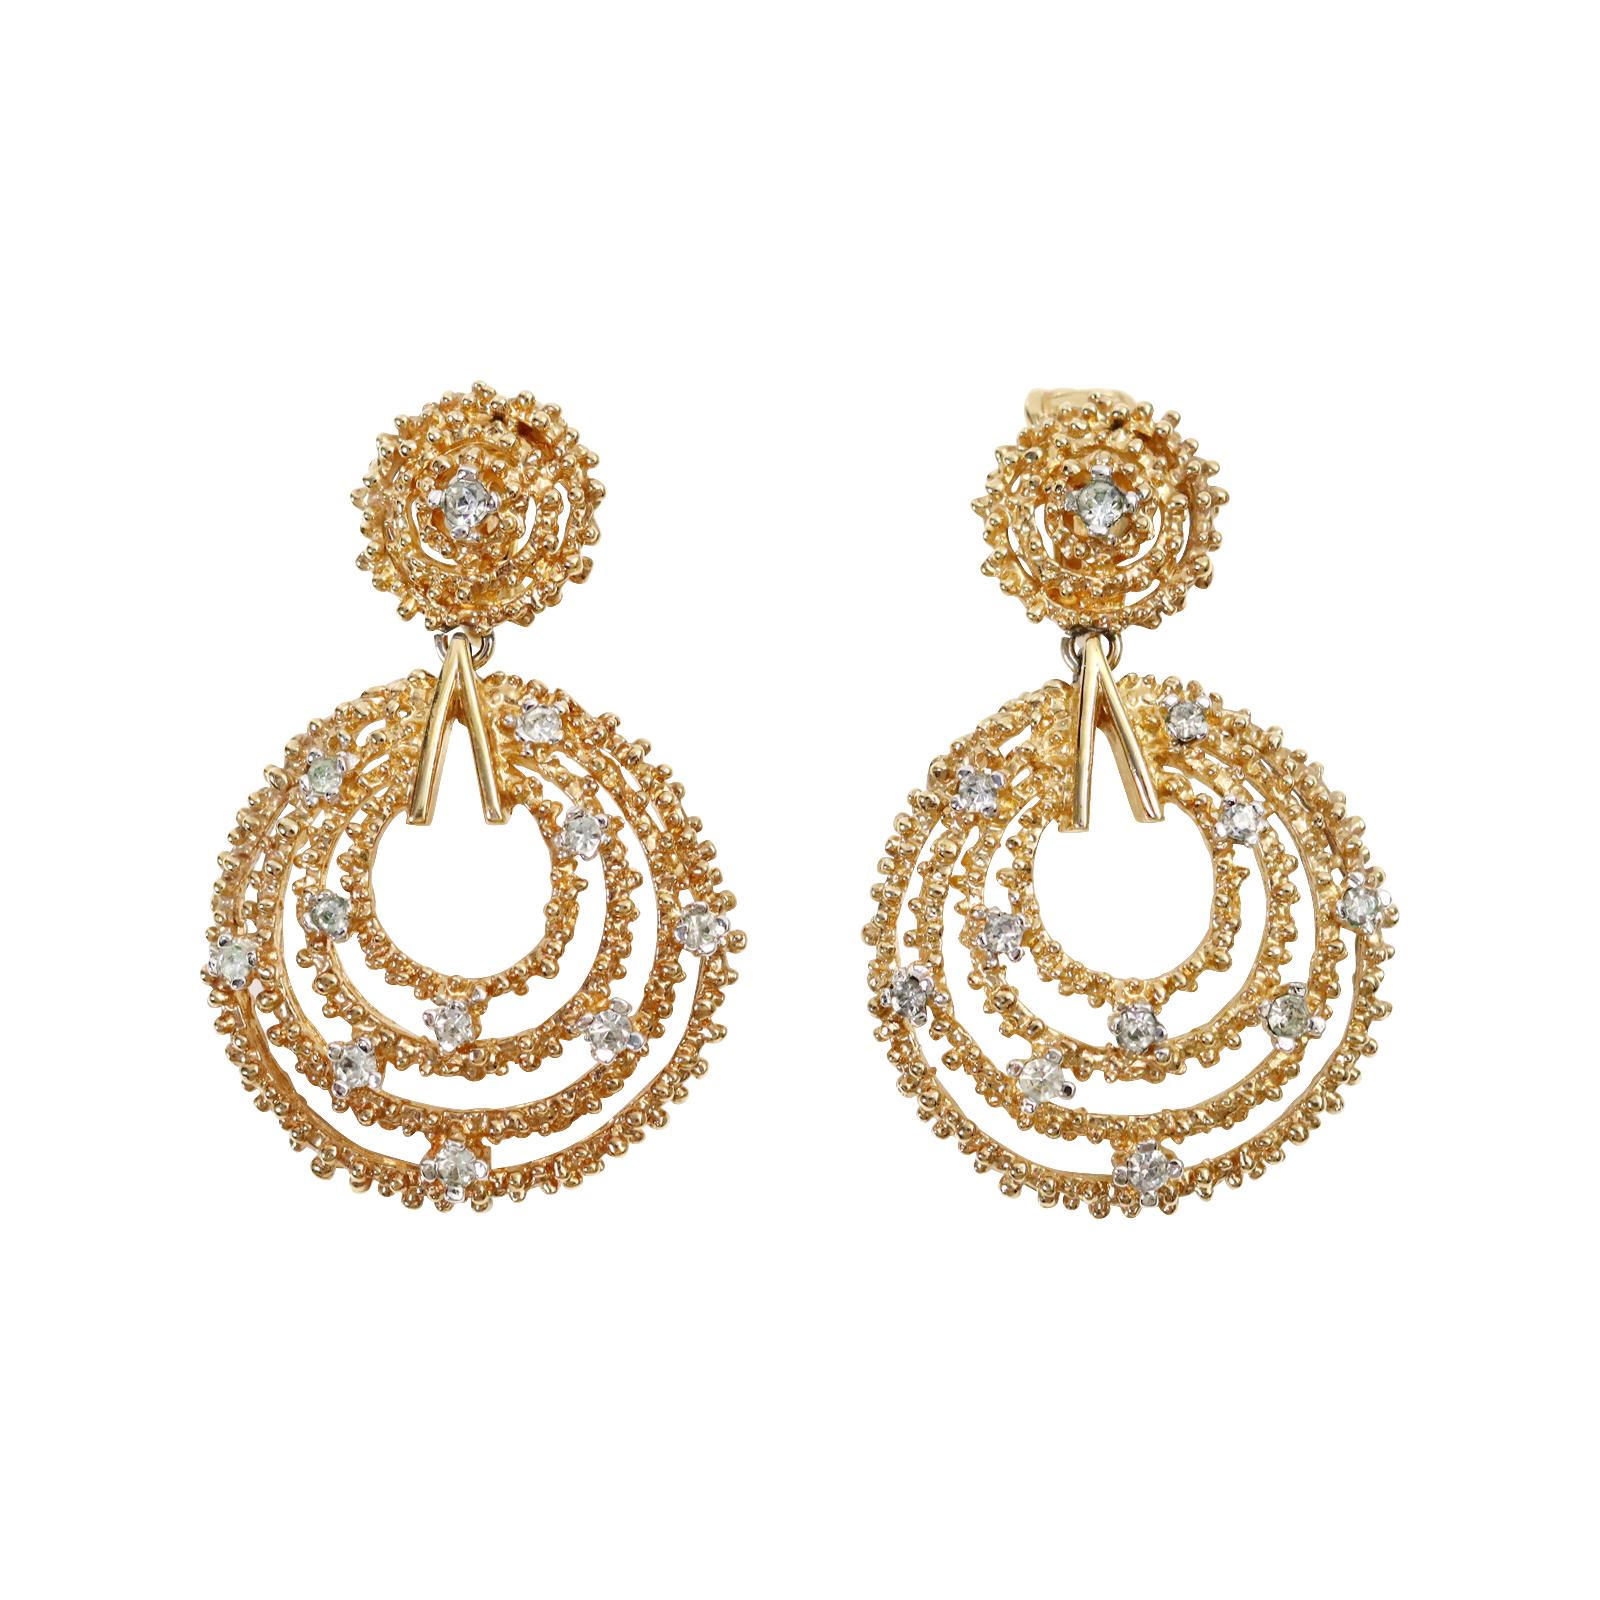 Vintage Panetta Gold Tone Diamante Hoop Earrings Circa 1960s. These small and delicate earrings have the look of fine the way they present.  They are shown in gold metal with diamante placed on the the metal of the hoops. They are enough to show but